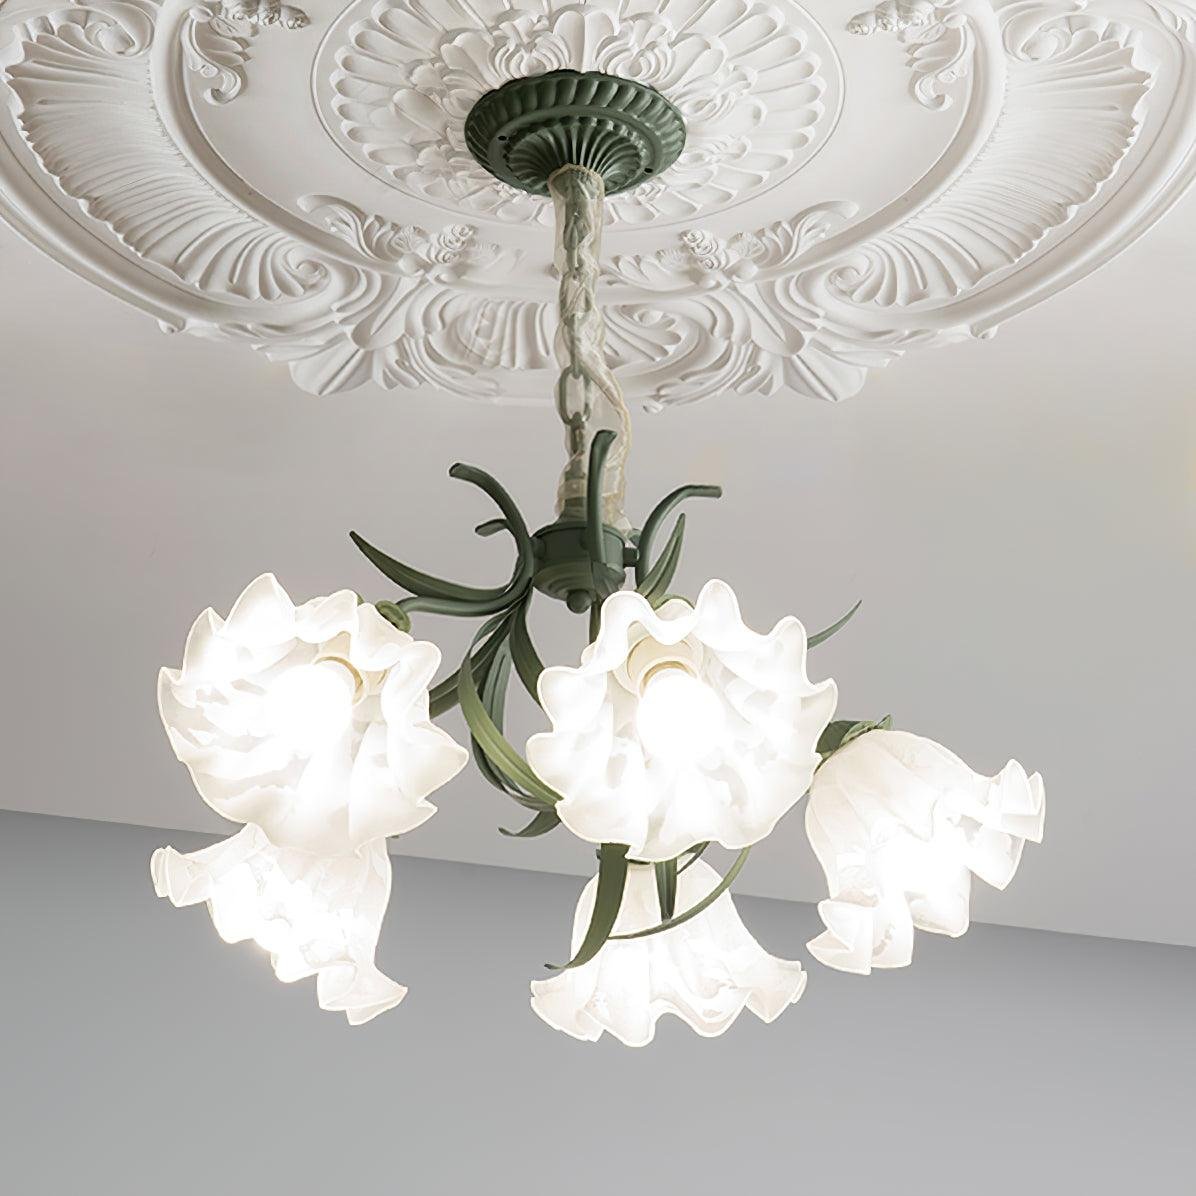 Green Lily of the Valley Flower Chandelier with 5 Heads, Diameter 24.8 inches x Height 12.6 inches (63cm x 32cm)